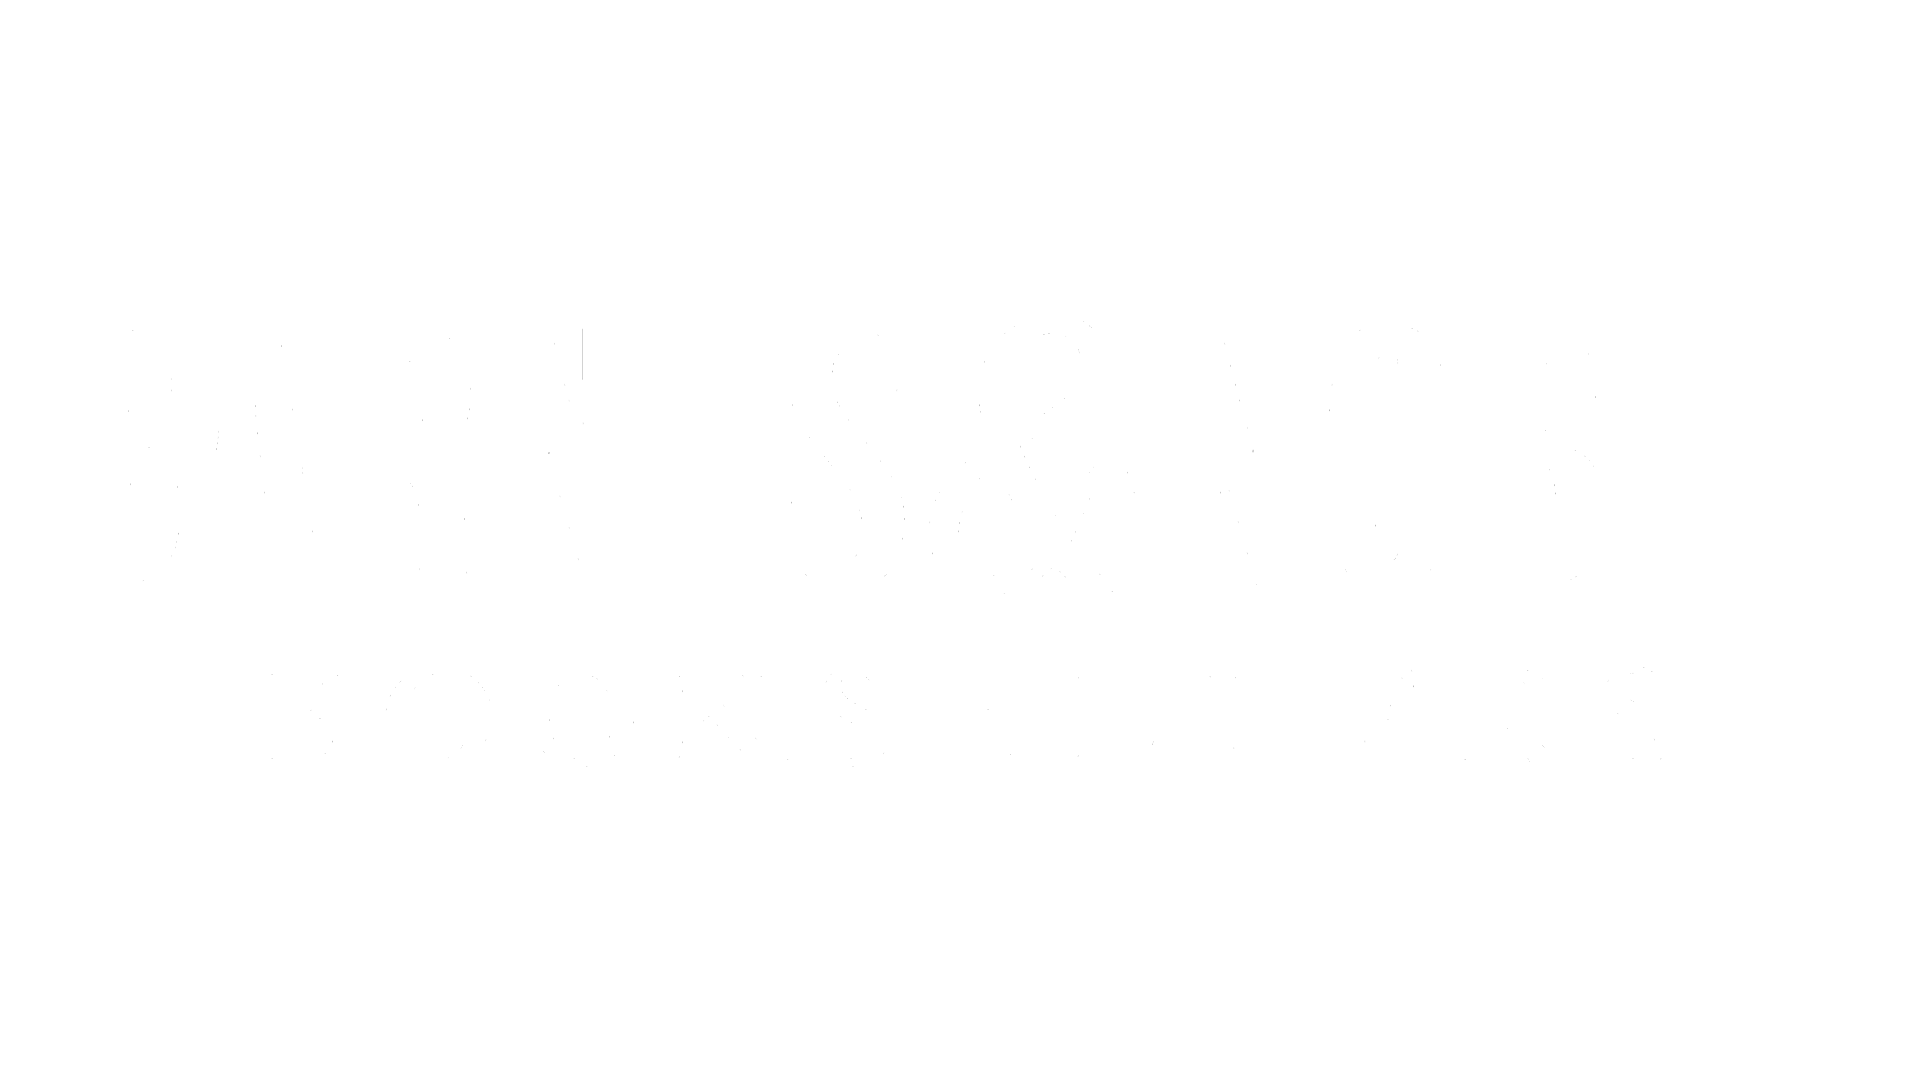 Barnes and Noble.png